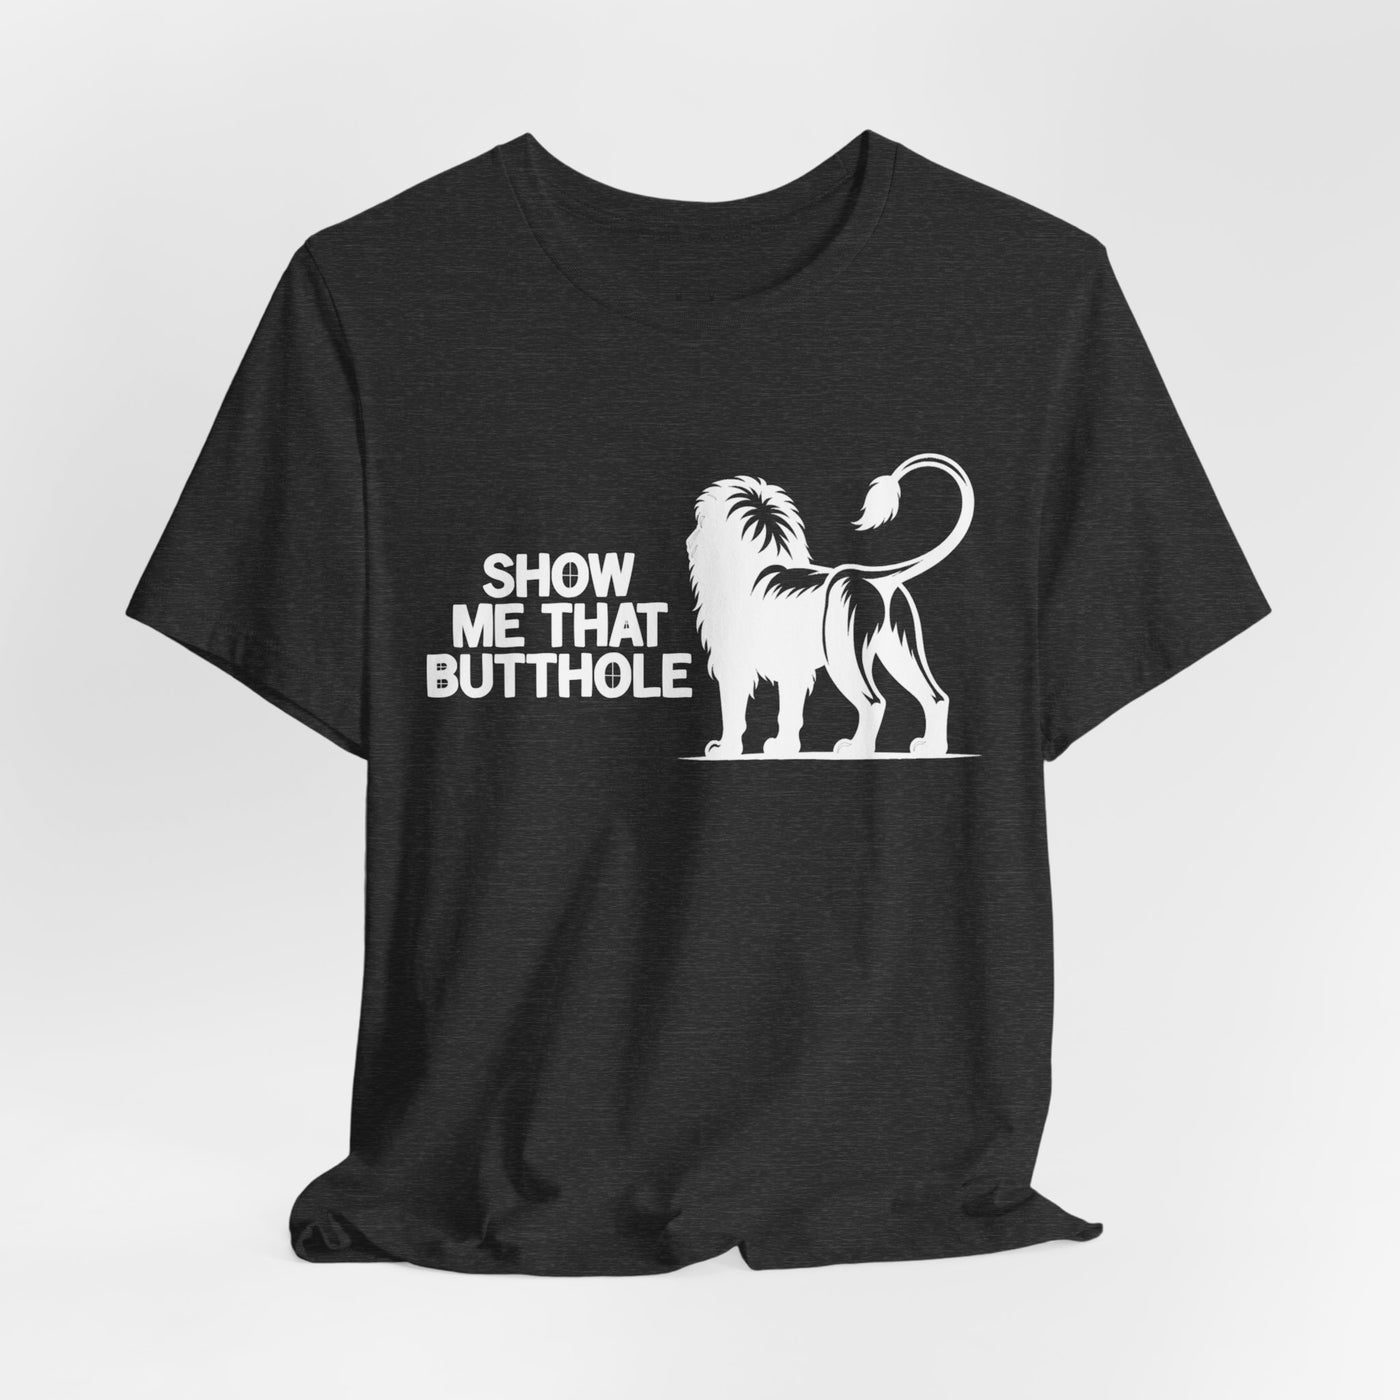 Show Me That Butthole